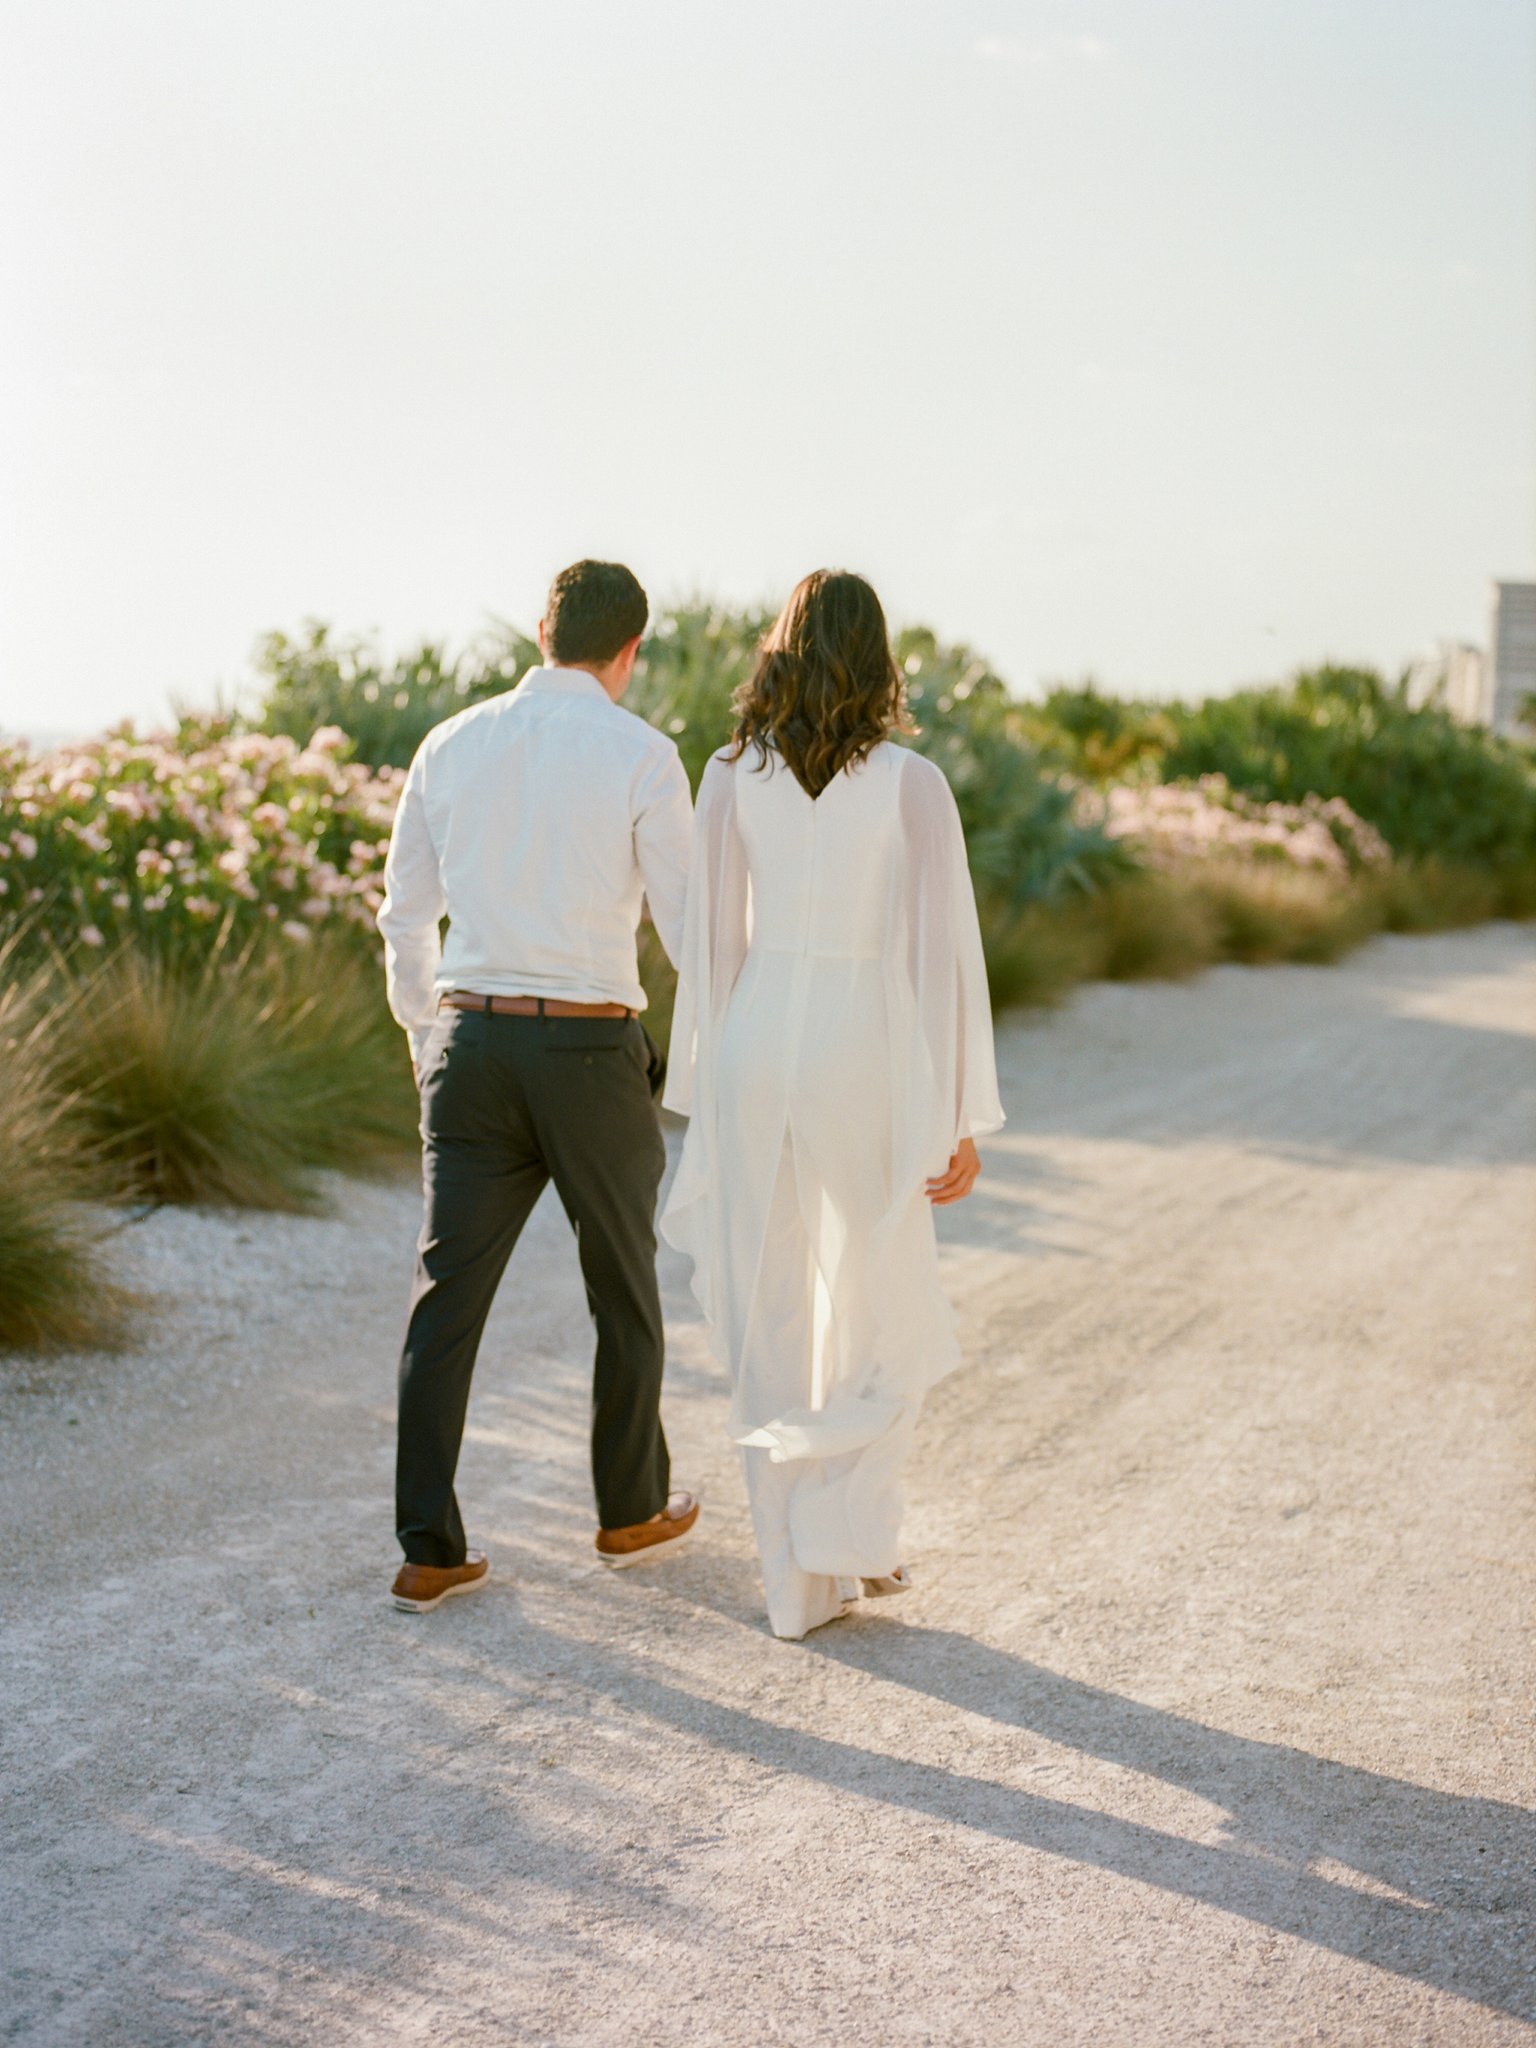 jw marriott marco island engagement session marco island wedding photographer shannon griffin photography_0025.jpg